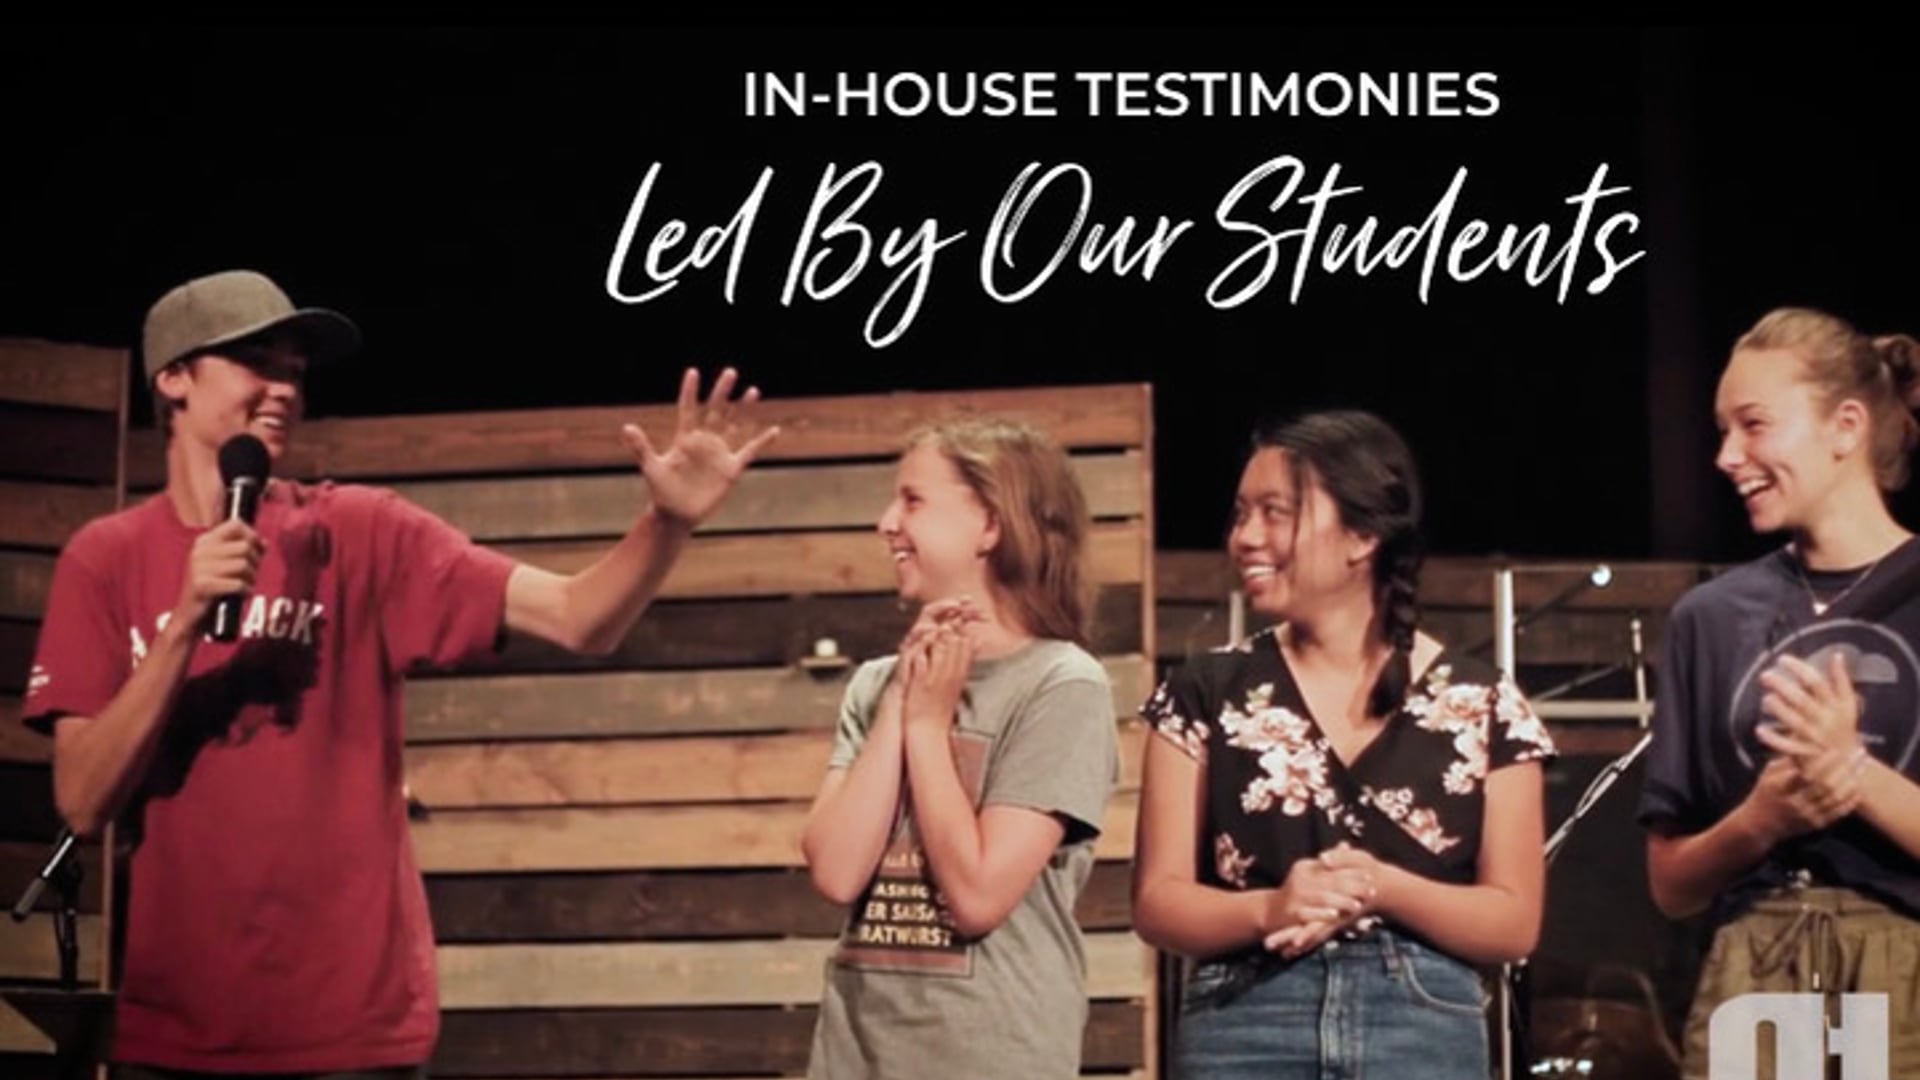 In-House Testimonies: Led by our Students